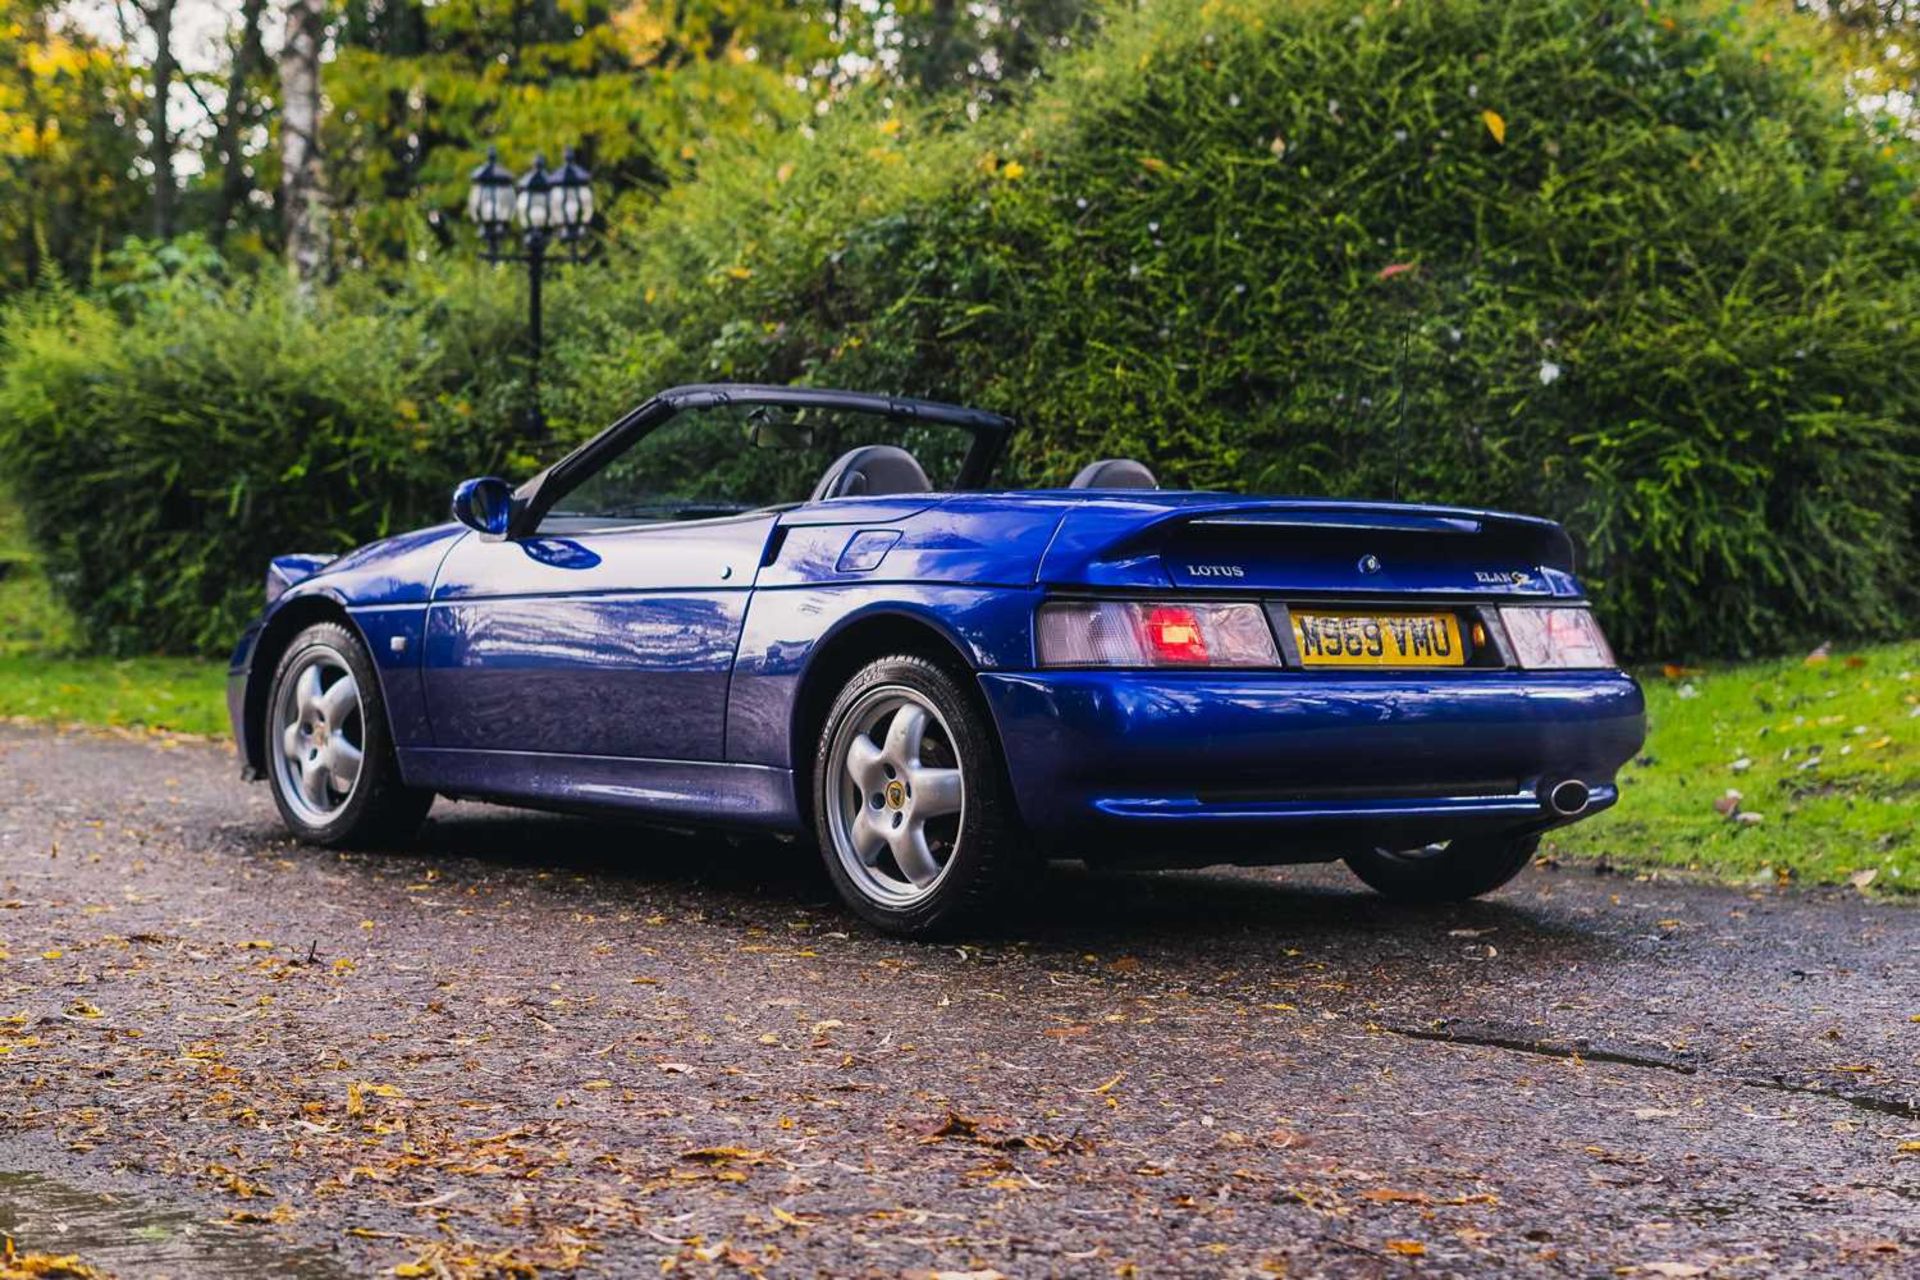 1995 Lotus Elan M100 S2 Turbo ***NO RESERVE*** Limited edition no. 673 of just 800 second series mod - Image 11 of 52